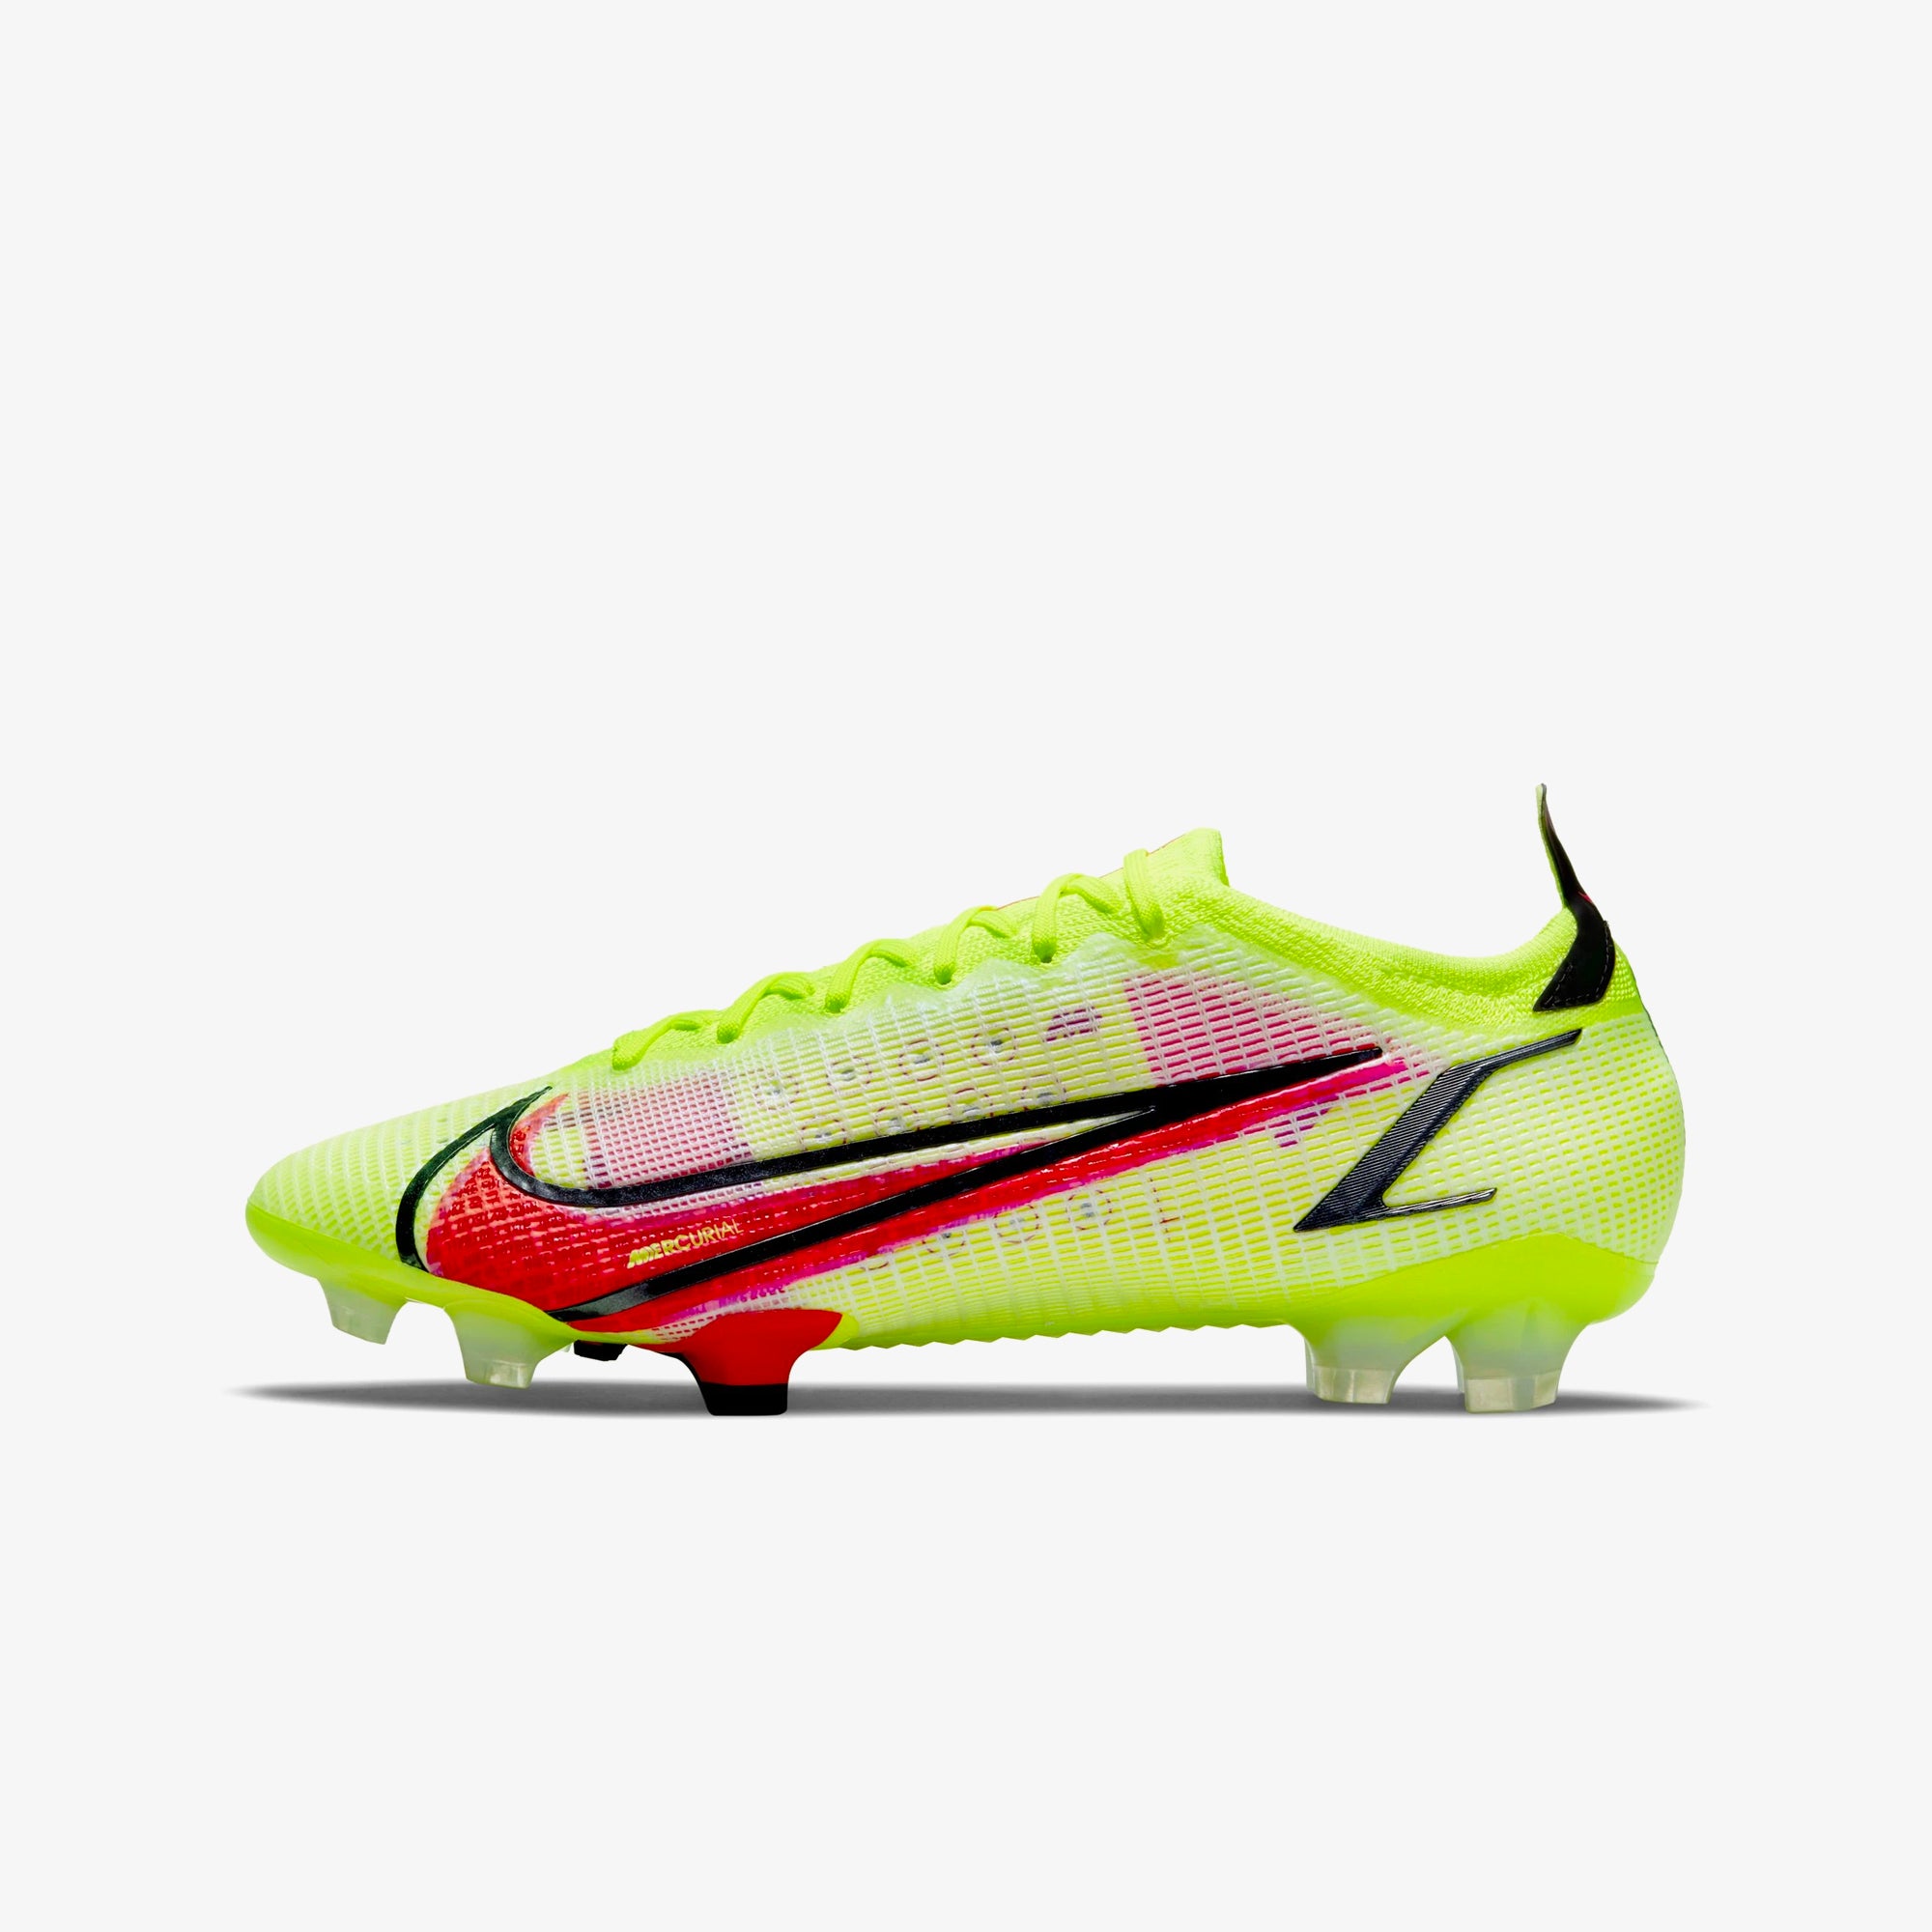 Nike Mercurial Elite FG Firm-Ground Soccer Cleats